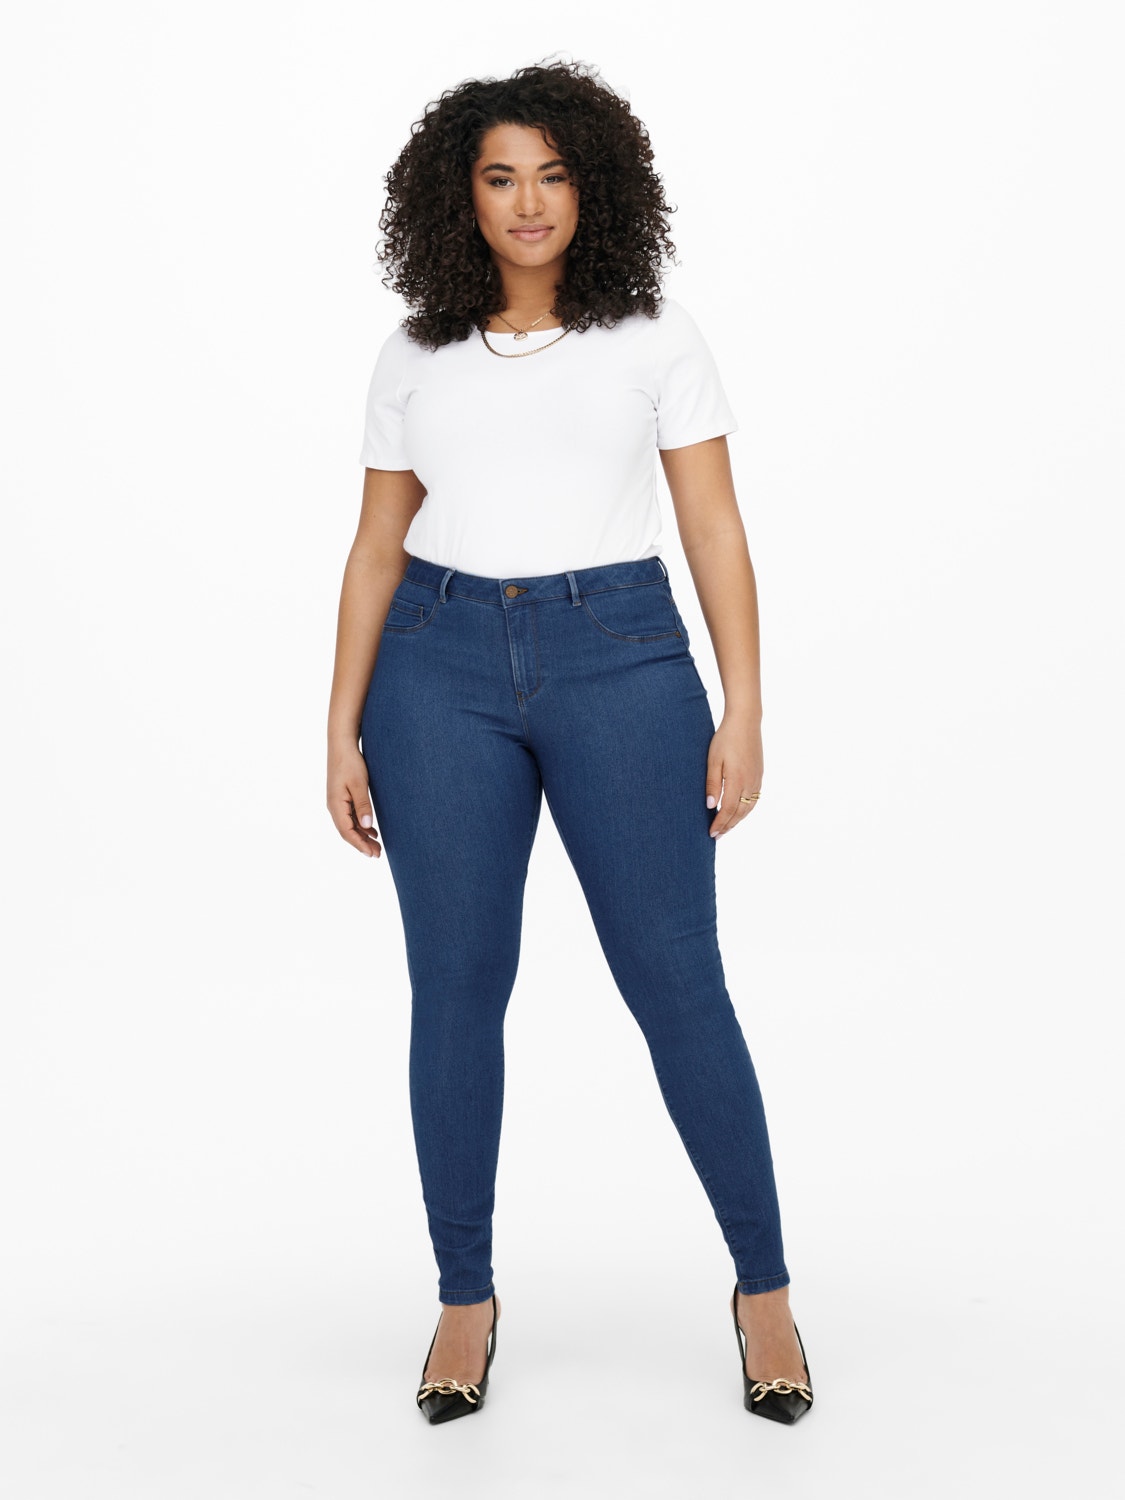 with discount! | CARThunder Skinny ONLY® 20% fit push-up jeans Curvy